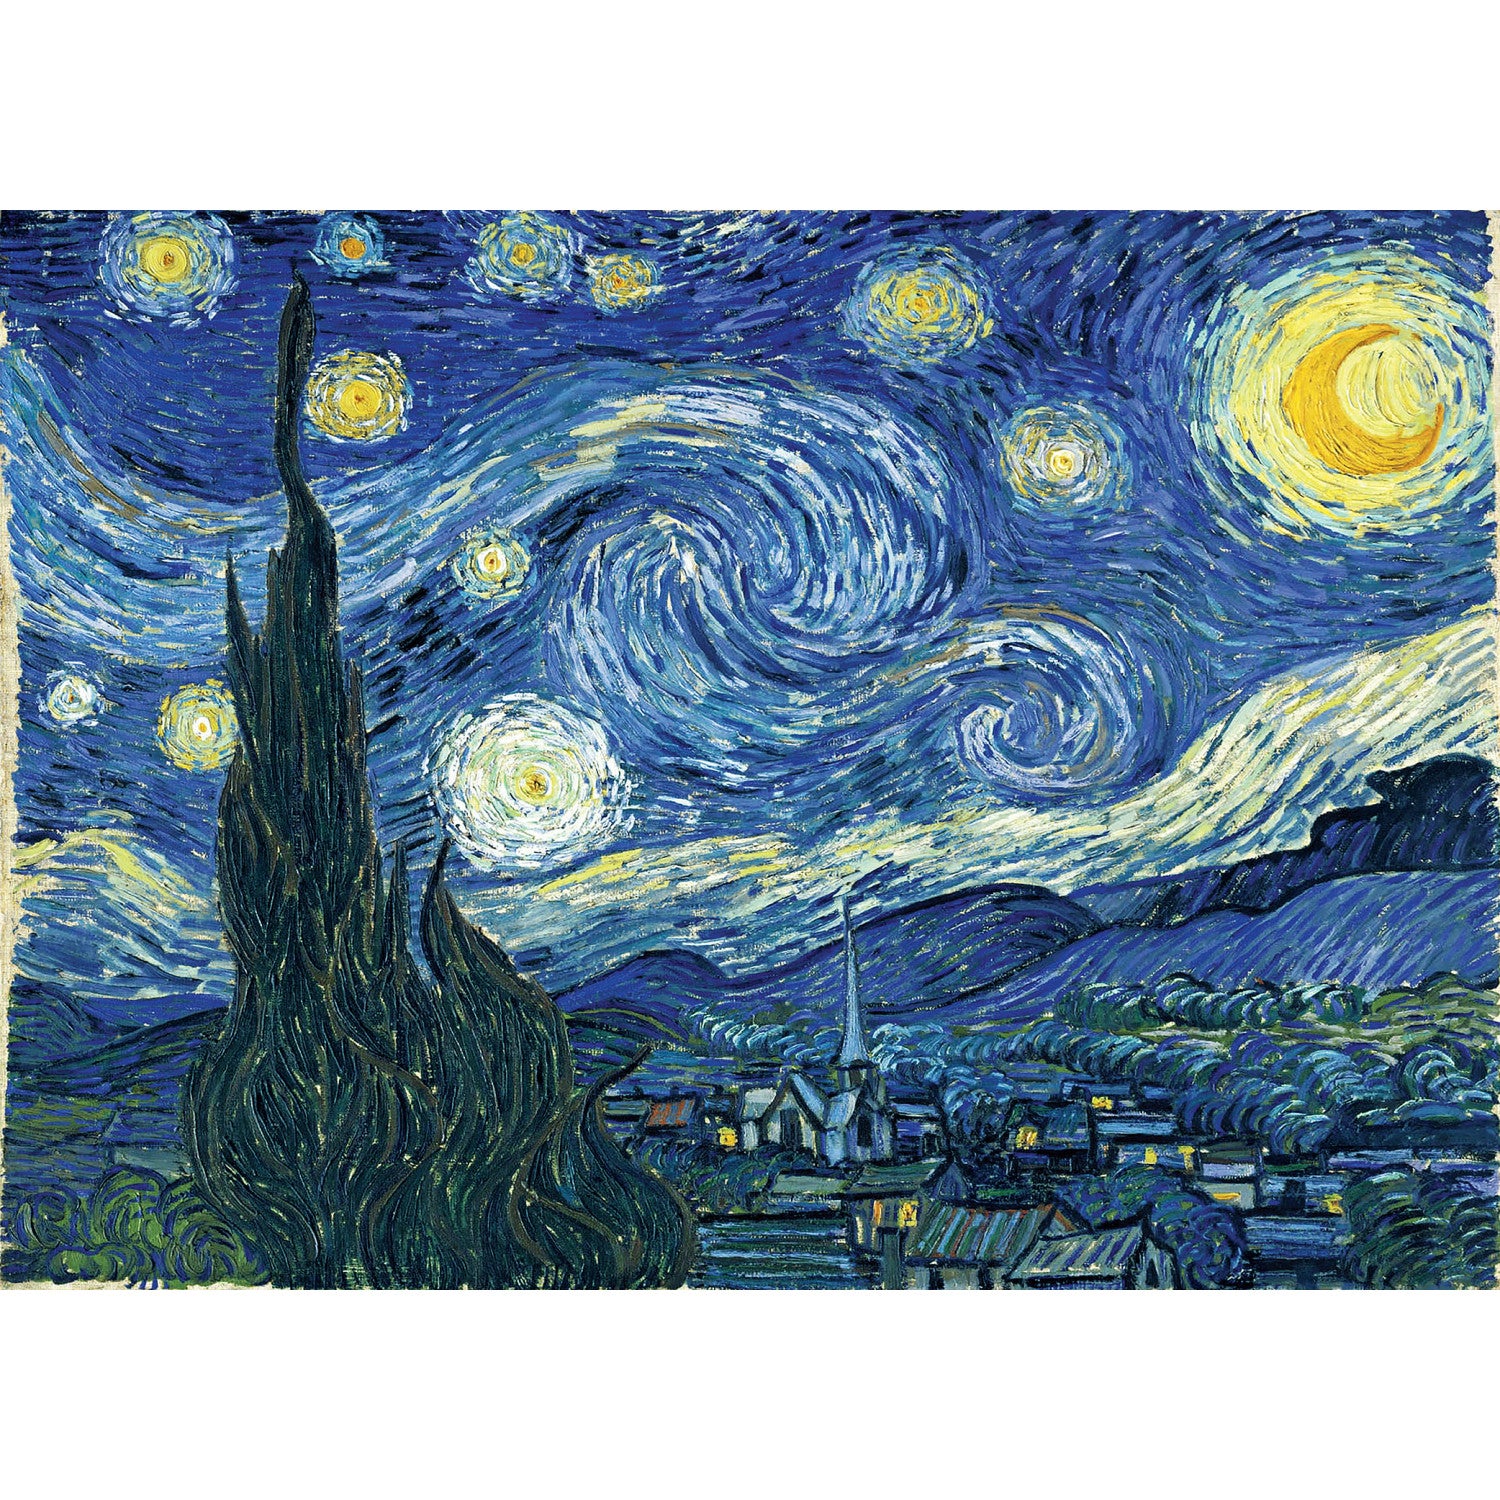 MasterPieces of Art - Starry Night 1000 Piece Puzzle